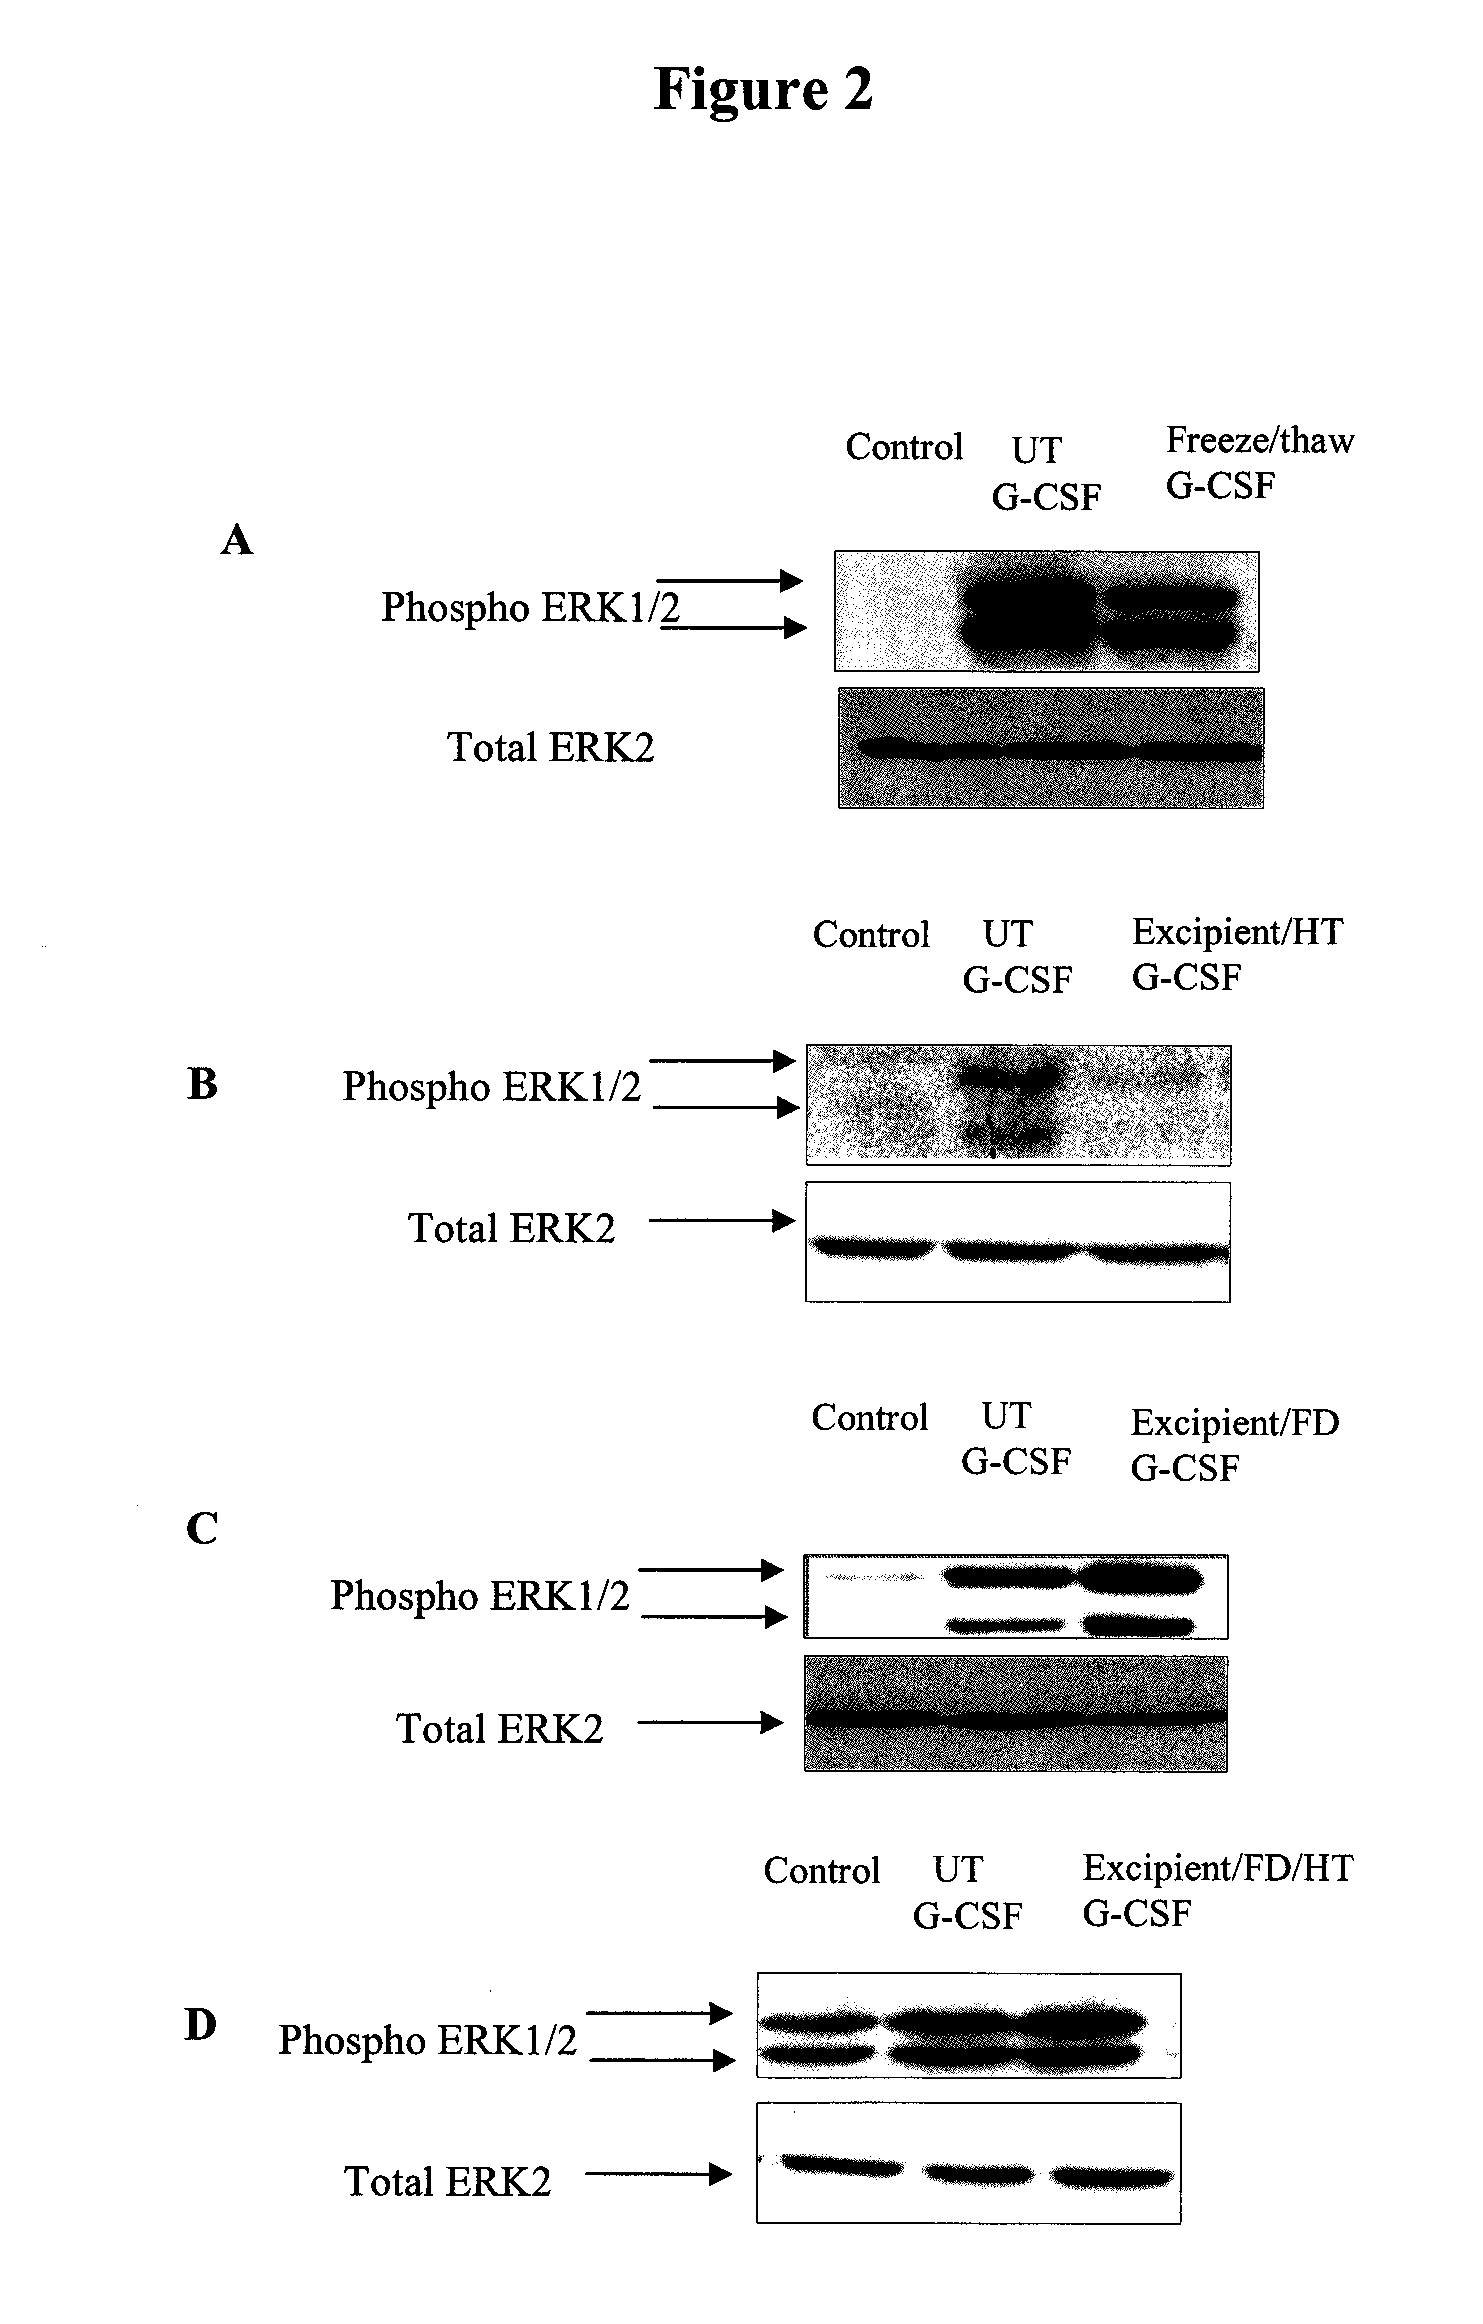 Method for Preserving Polypeptides Using a Sugar and Polyethyleneimine